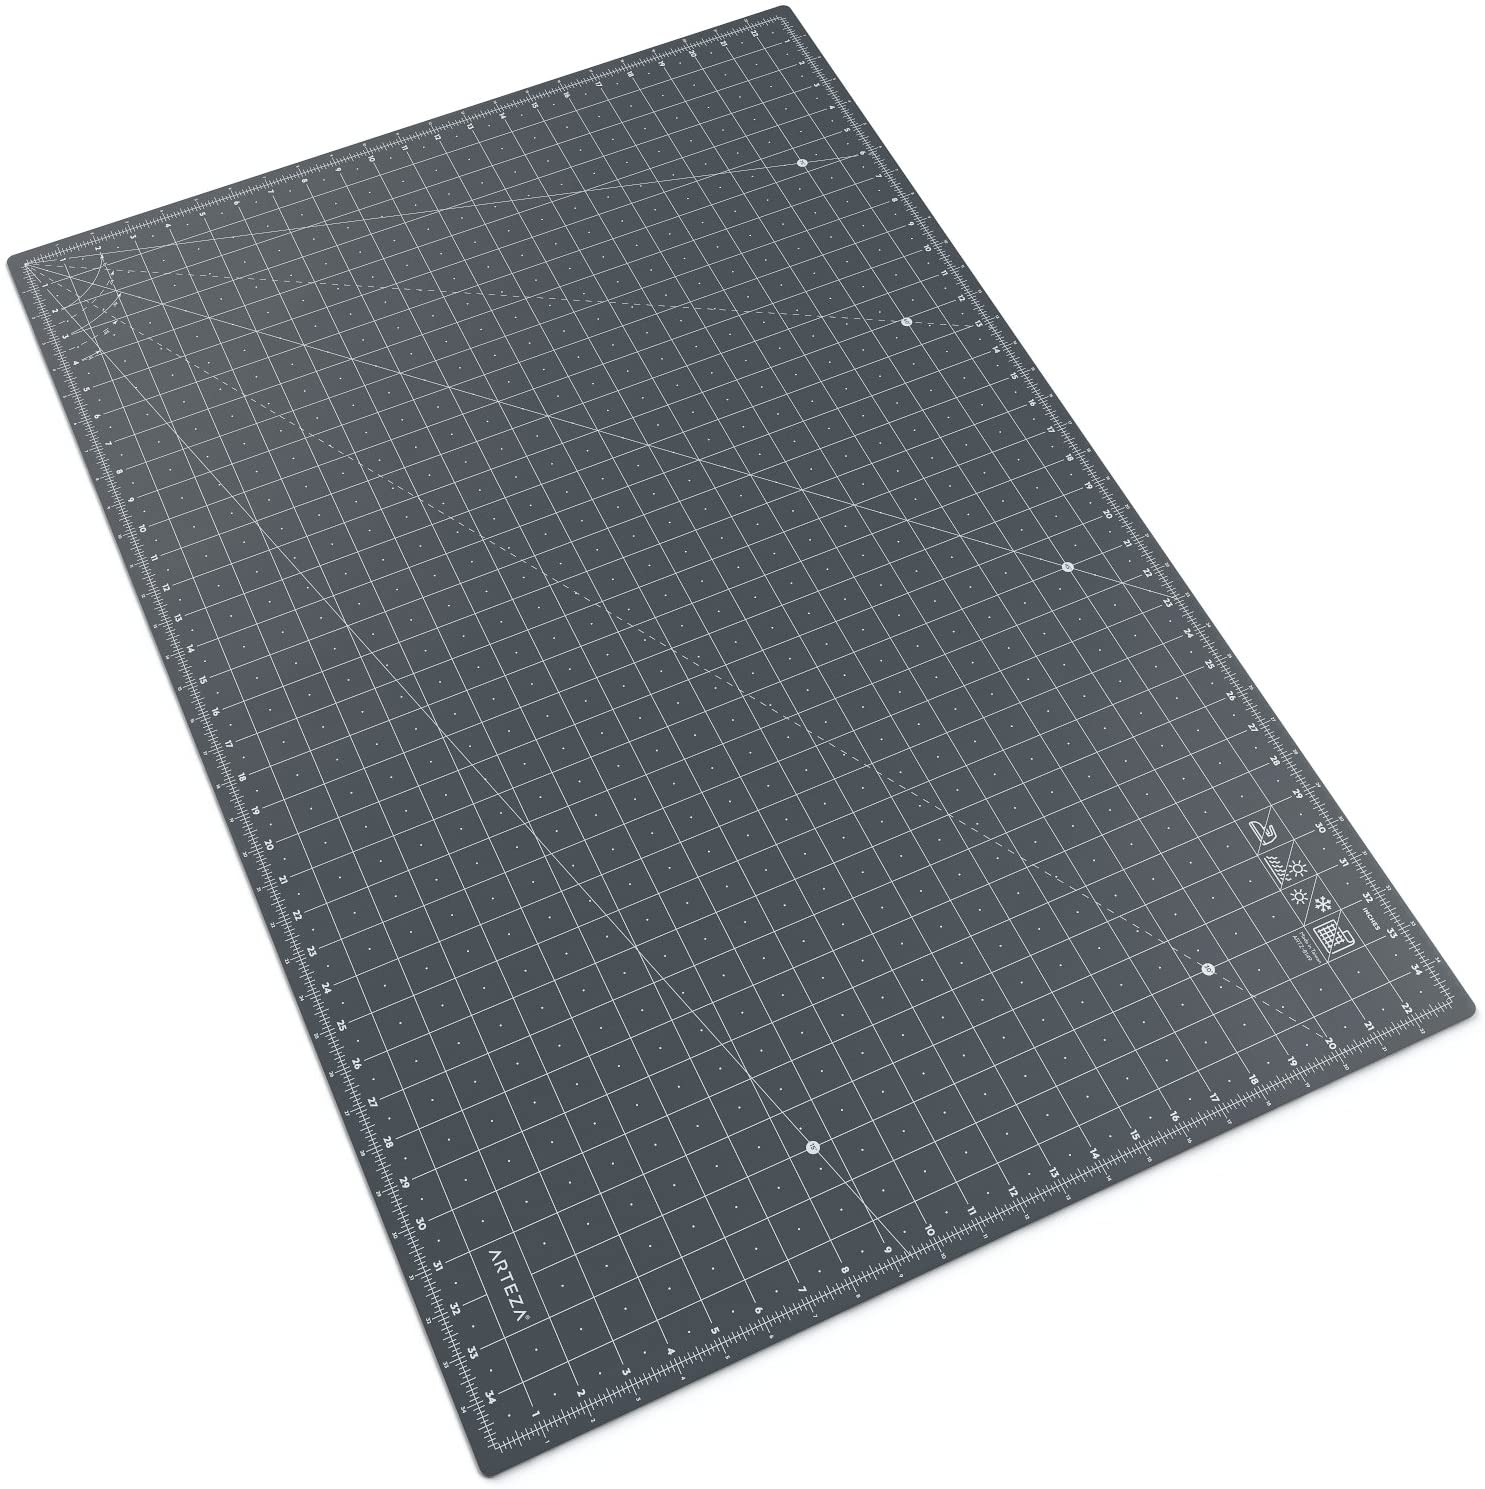 Size A1 24 X 36 Self-healing CUTTING MAT Reversible Inches and Centimeters  Thoughtful Design 5 Layer Mat, Finest Available -  Israel